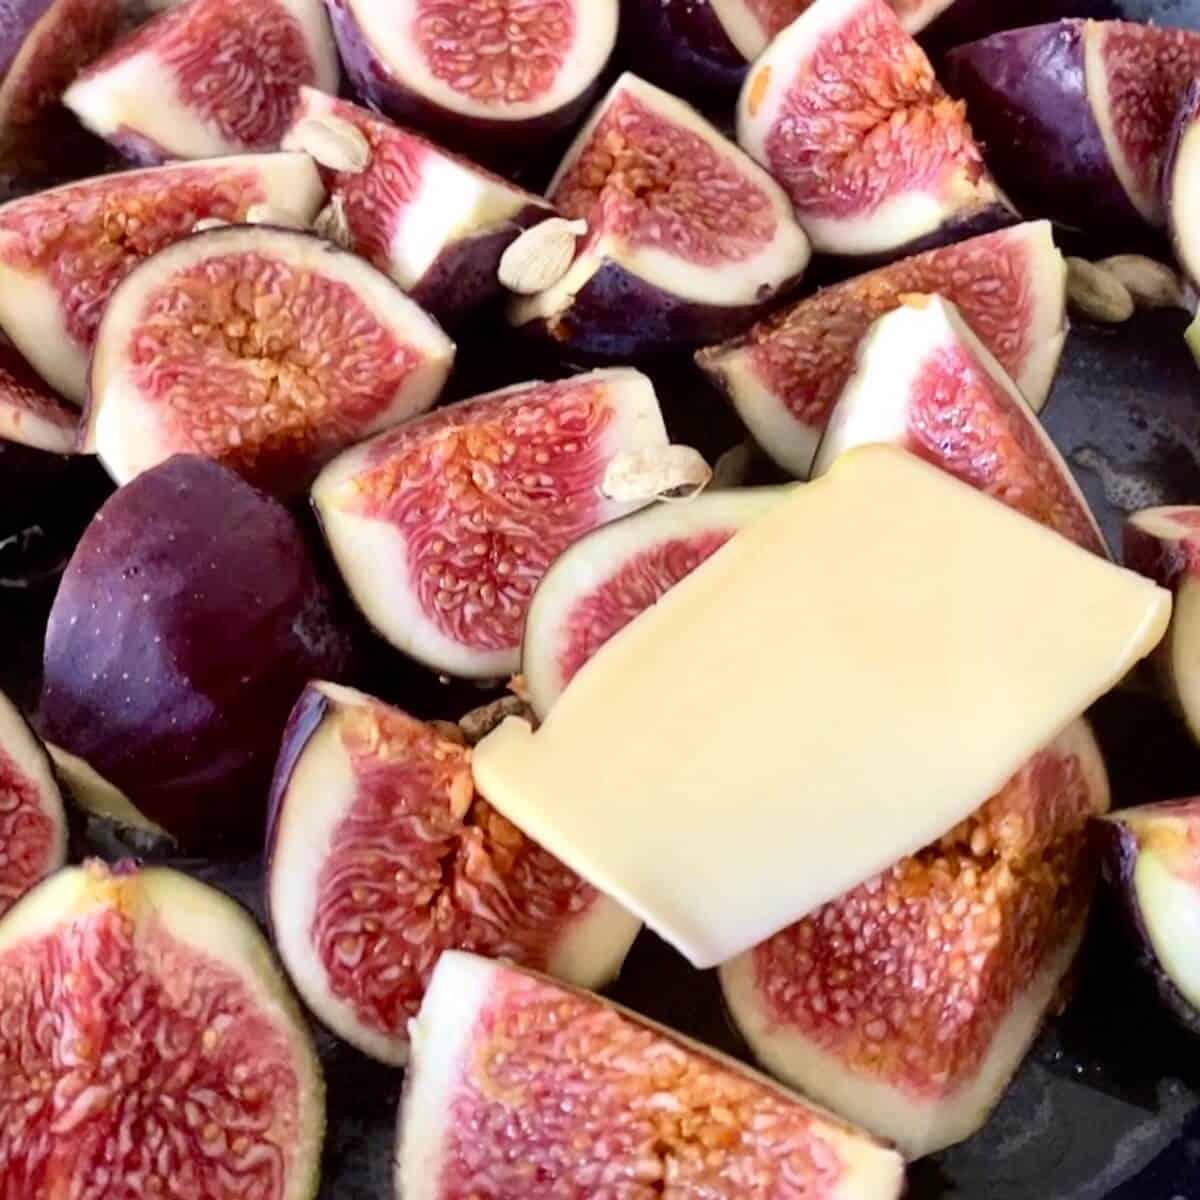 Figs and cardamom pods cooking in butter snd sugar. 